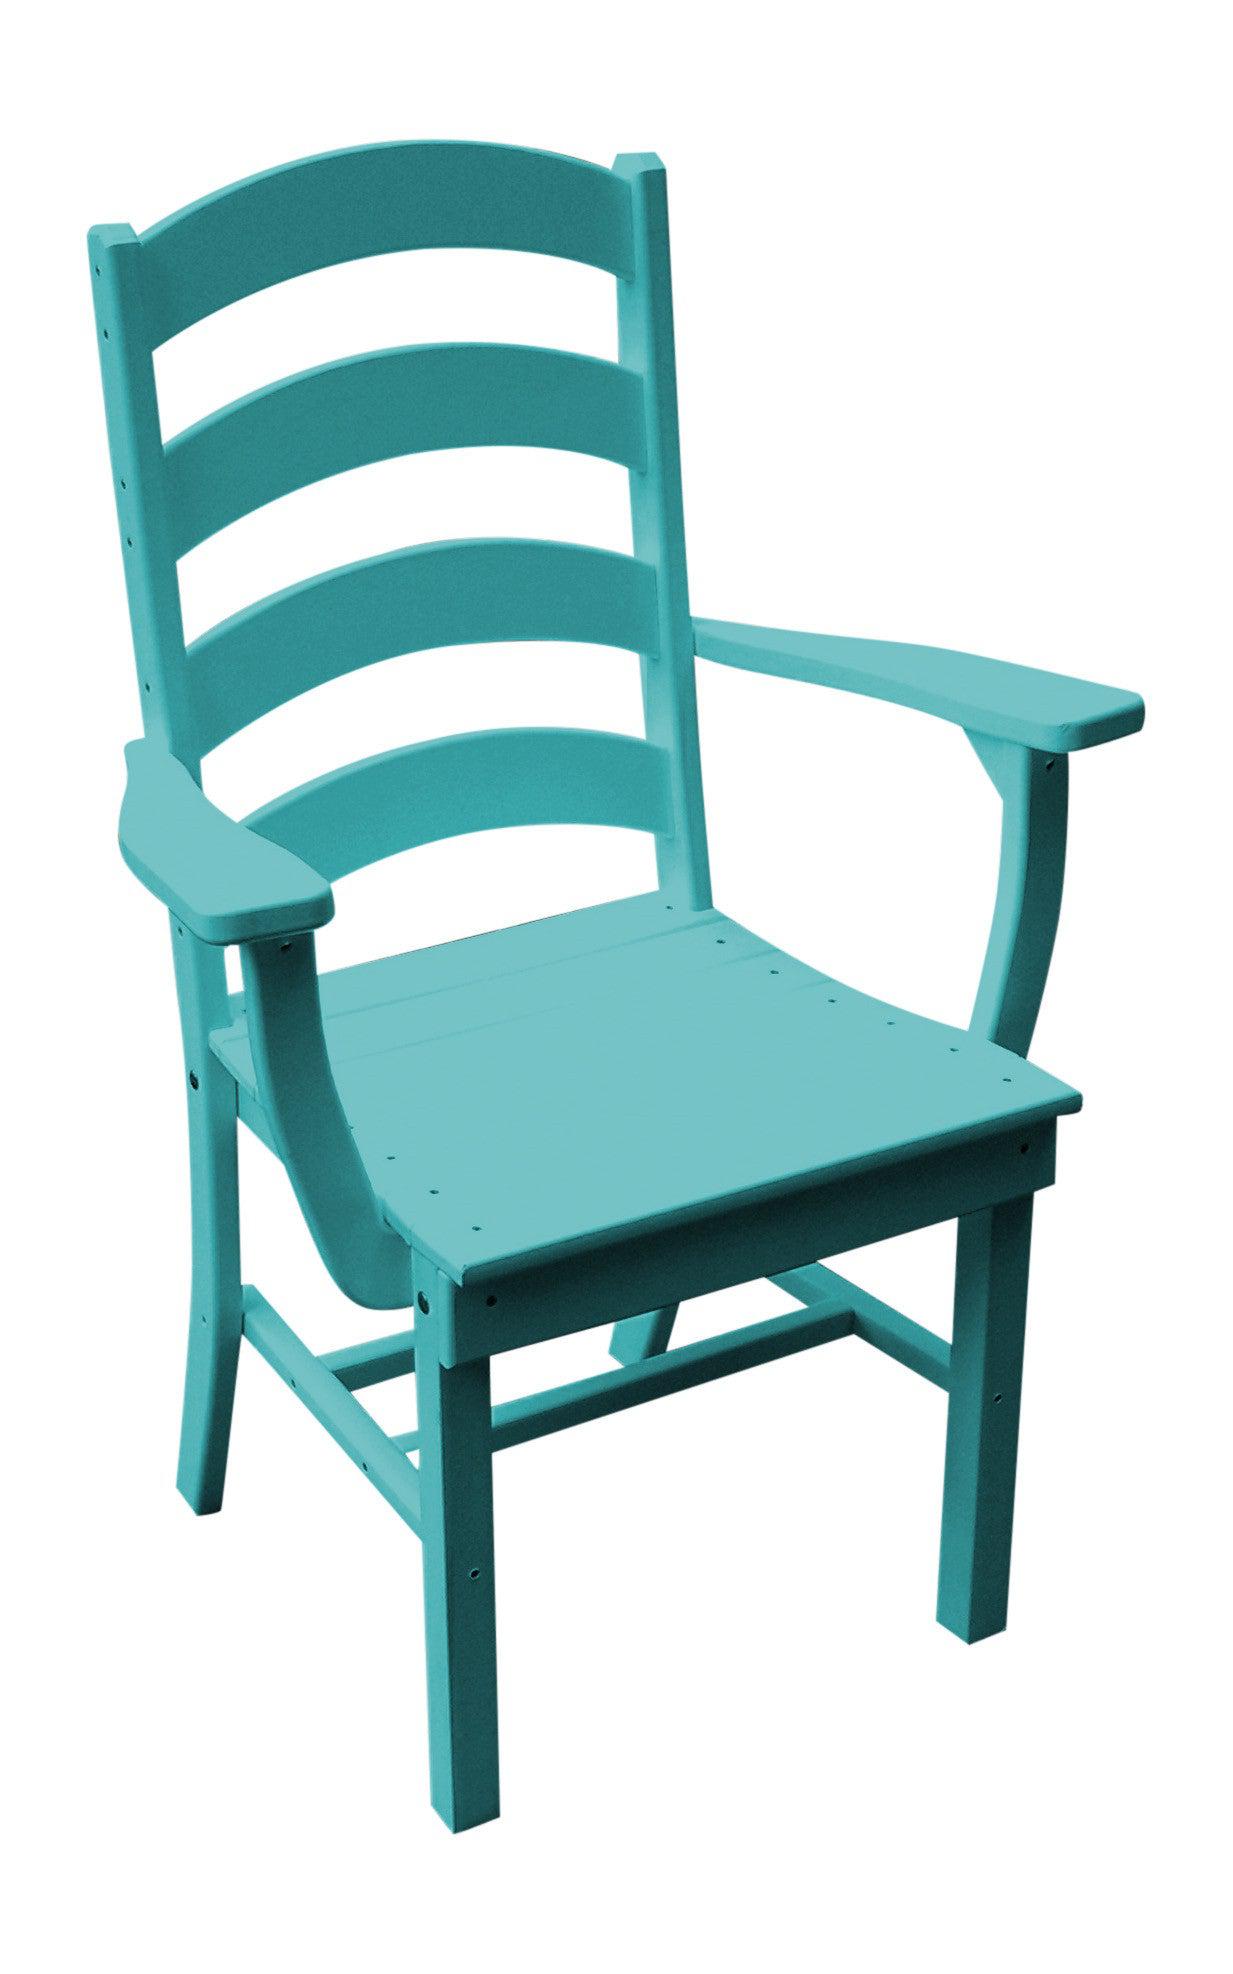 A&L Furniture Company Recycled Plastic Ladderback Dining Chair w/ Arms - Aruba Blue